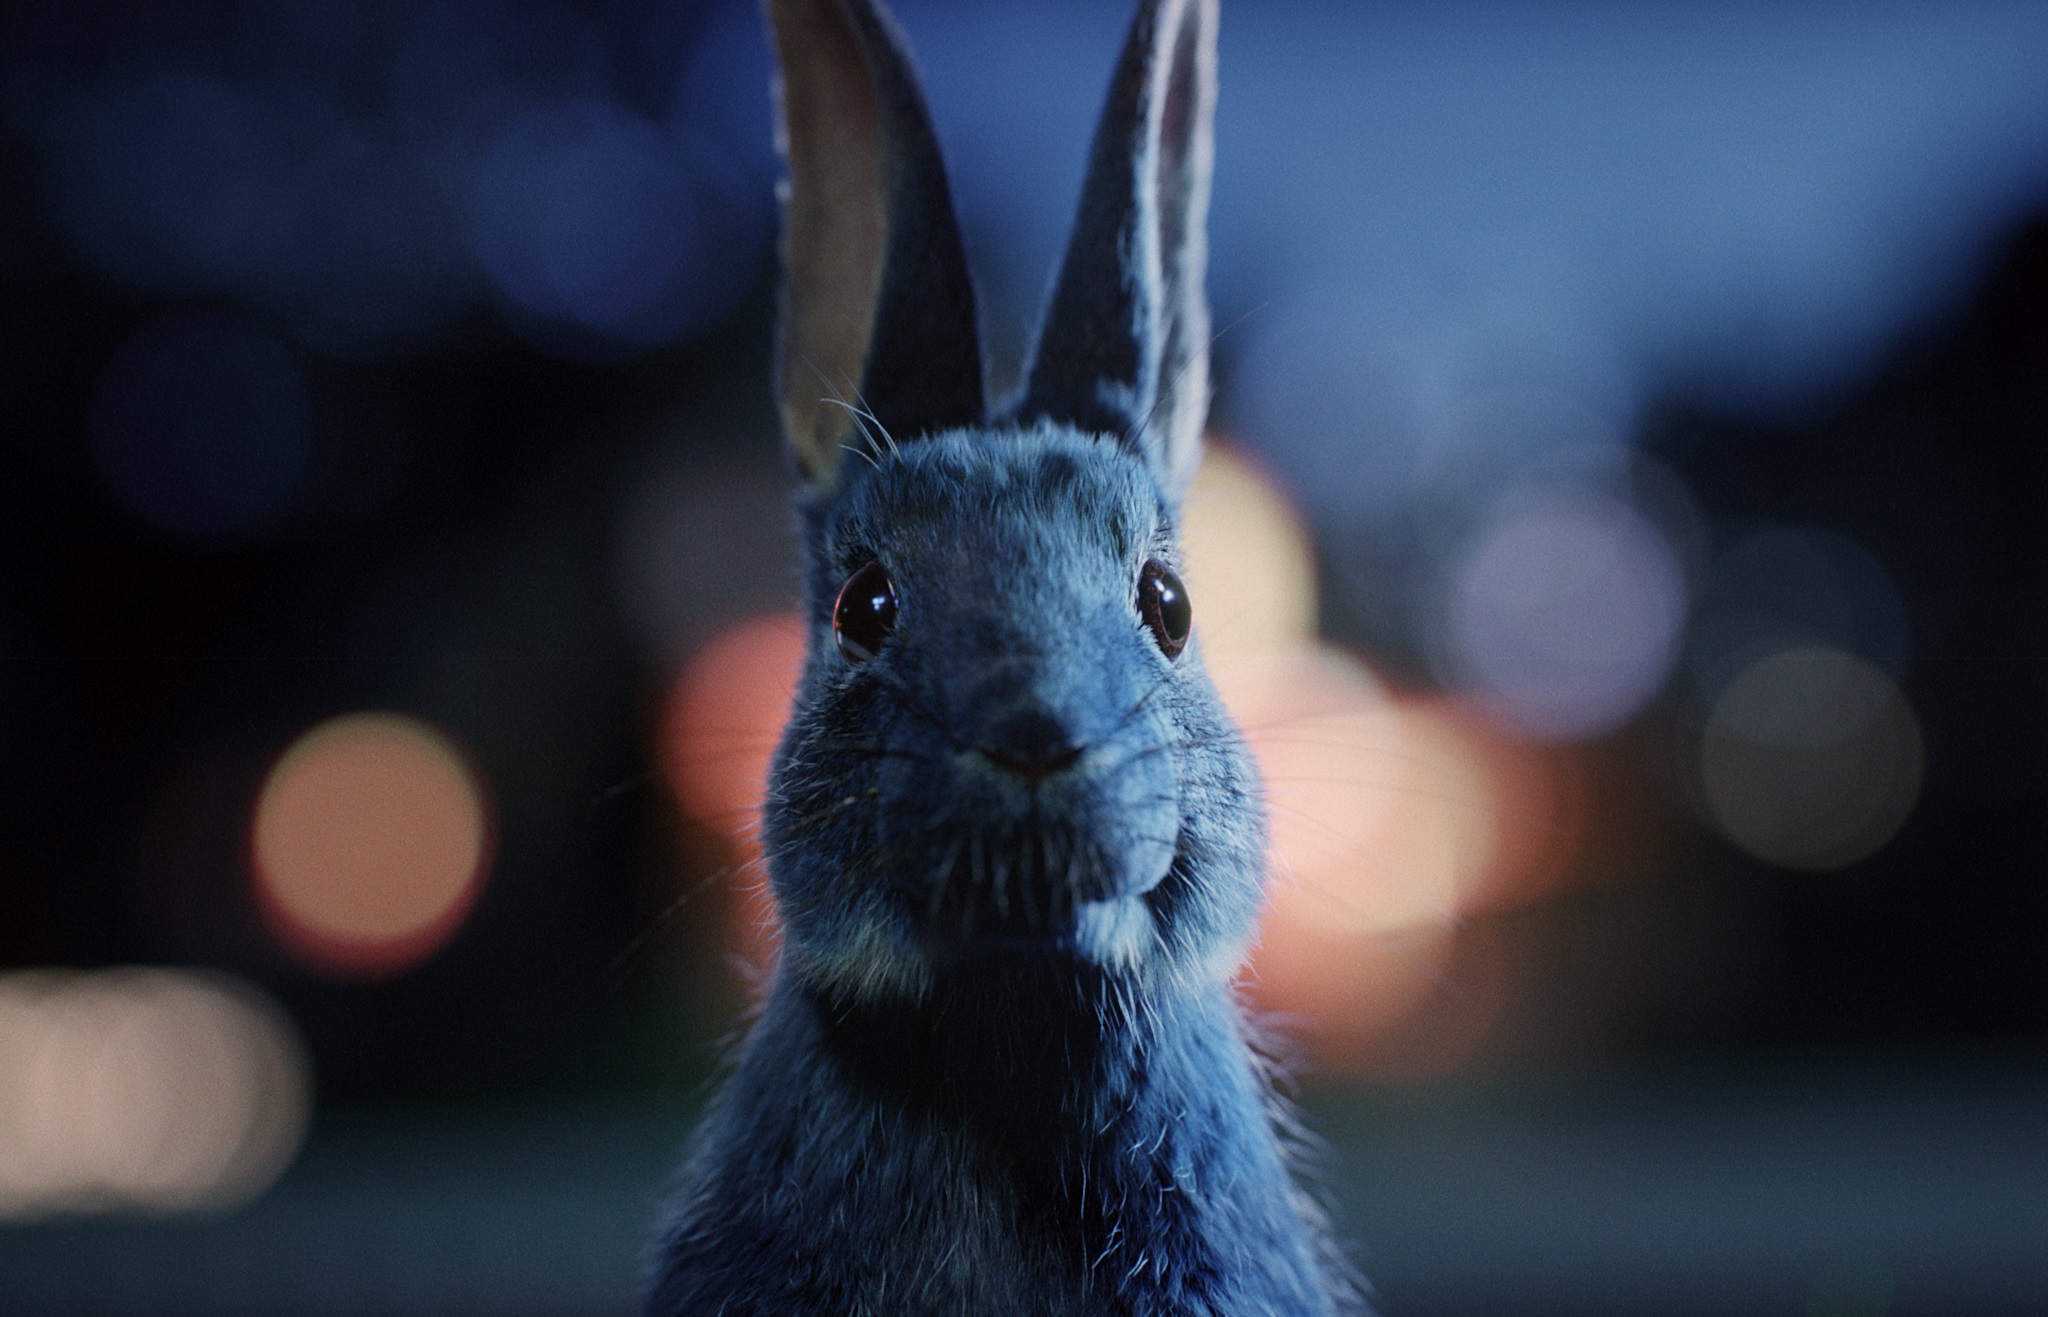 O2 promotes live music in new #FollowTheRabbit campaign